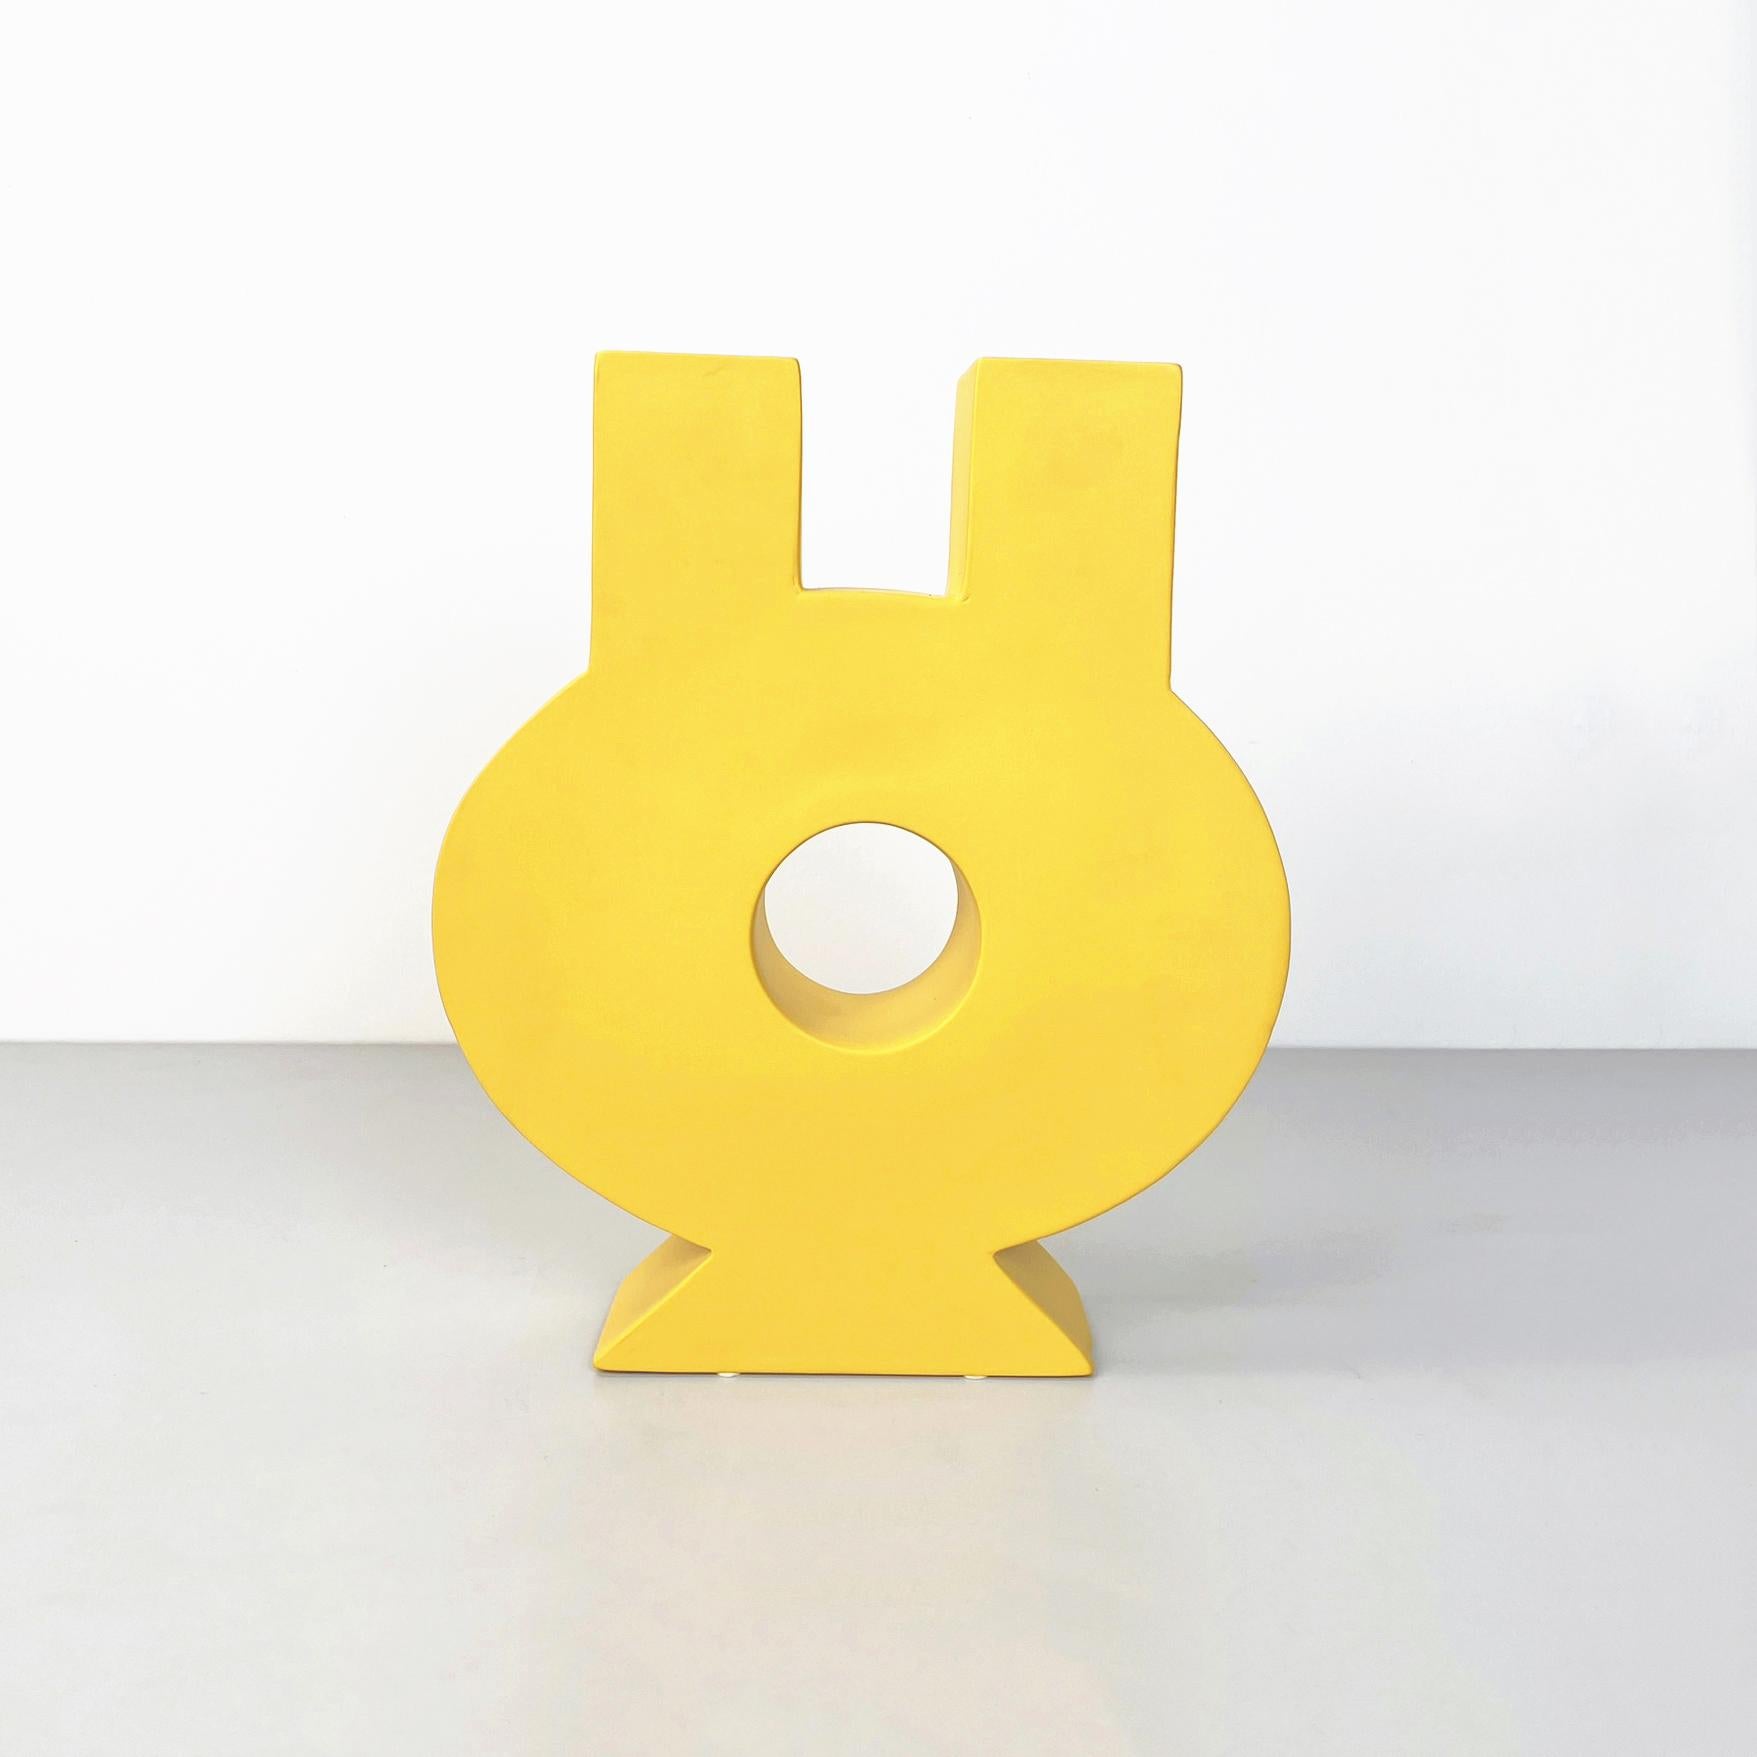 Italian postmodern yellow ceramic sculpture by Florio Pac Paccagnella, 2023
Bright yellow painted ceramic sculpture Polifemo with matte finish. The subject of the sculpture is geometric composed of a circle with holes in the center and two upper